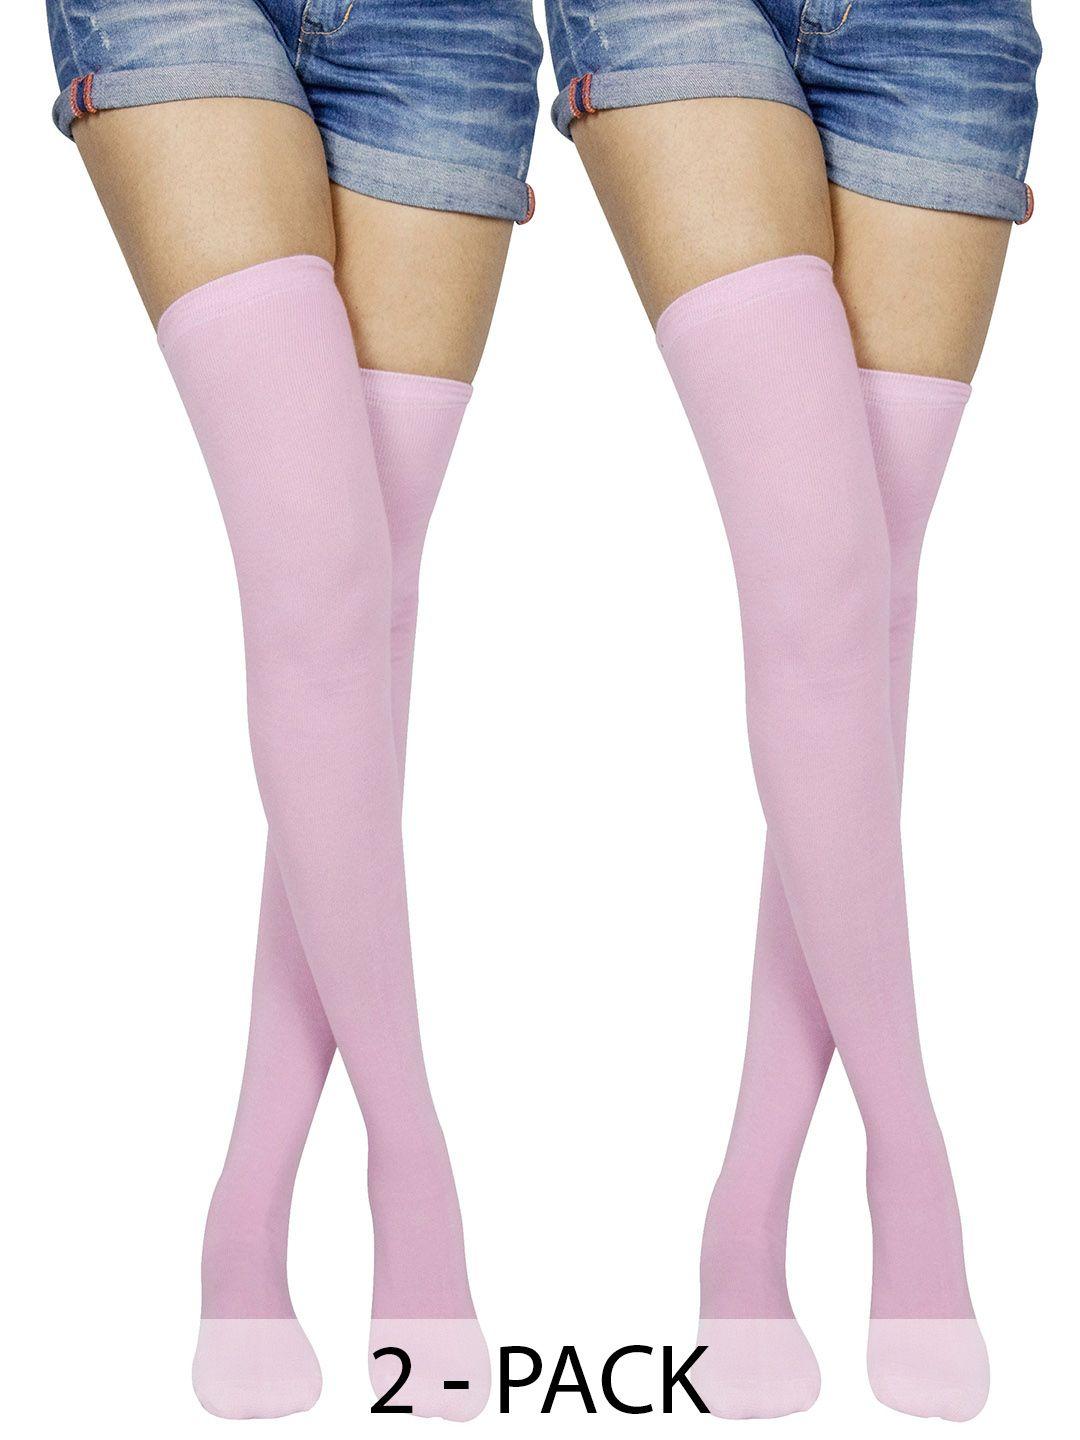 baesd pack of 2 cotton thigh-high stockings